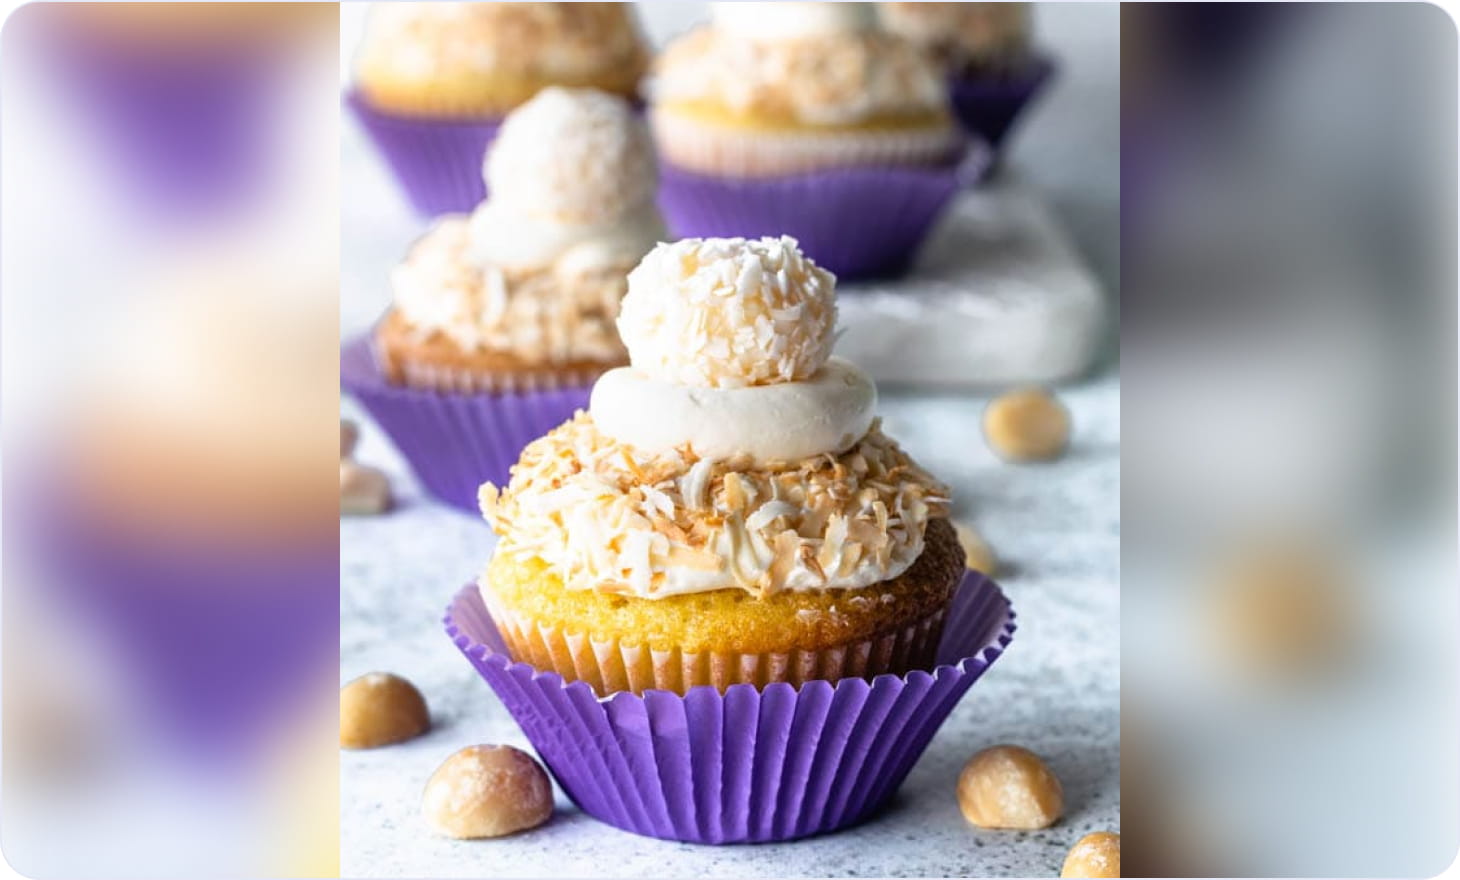 Muffin recipe with nuts and chocolate